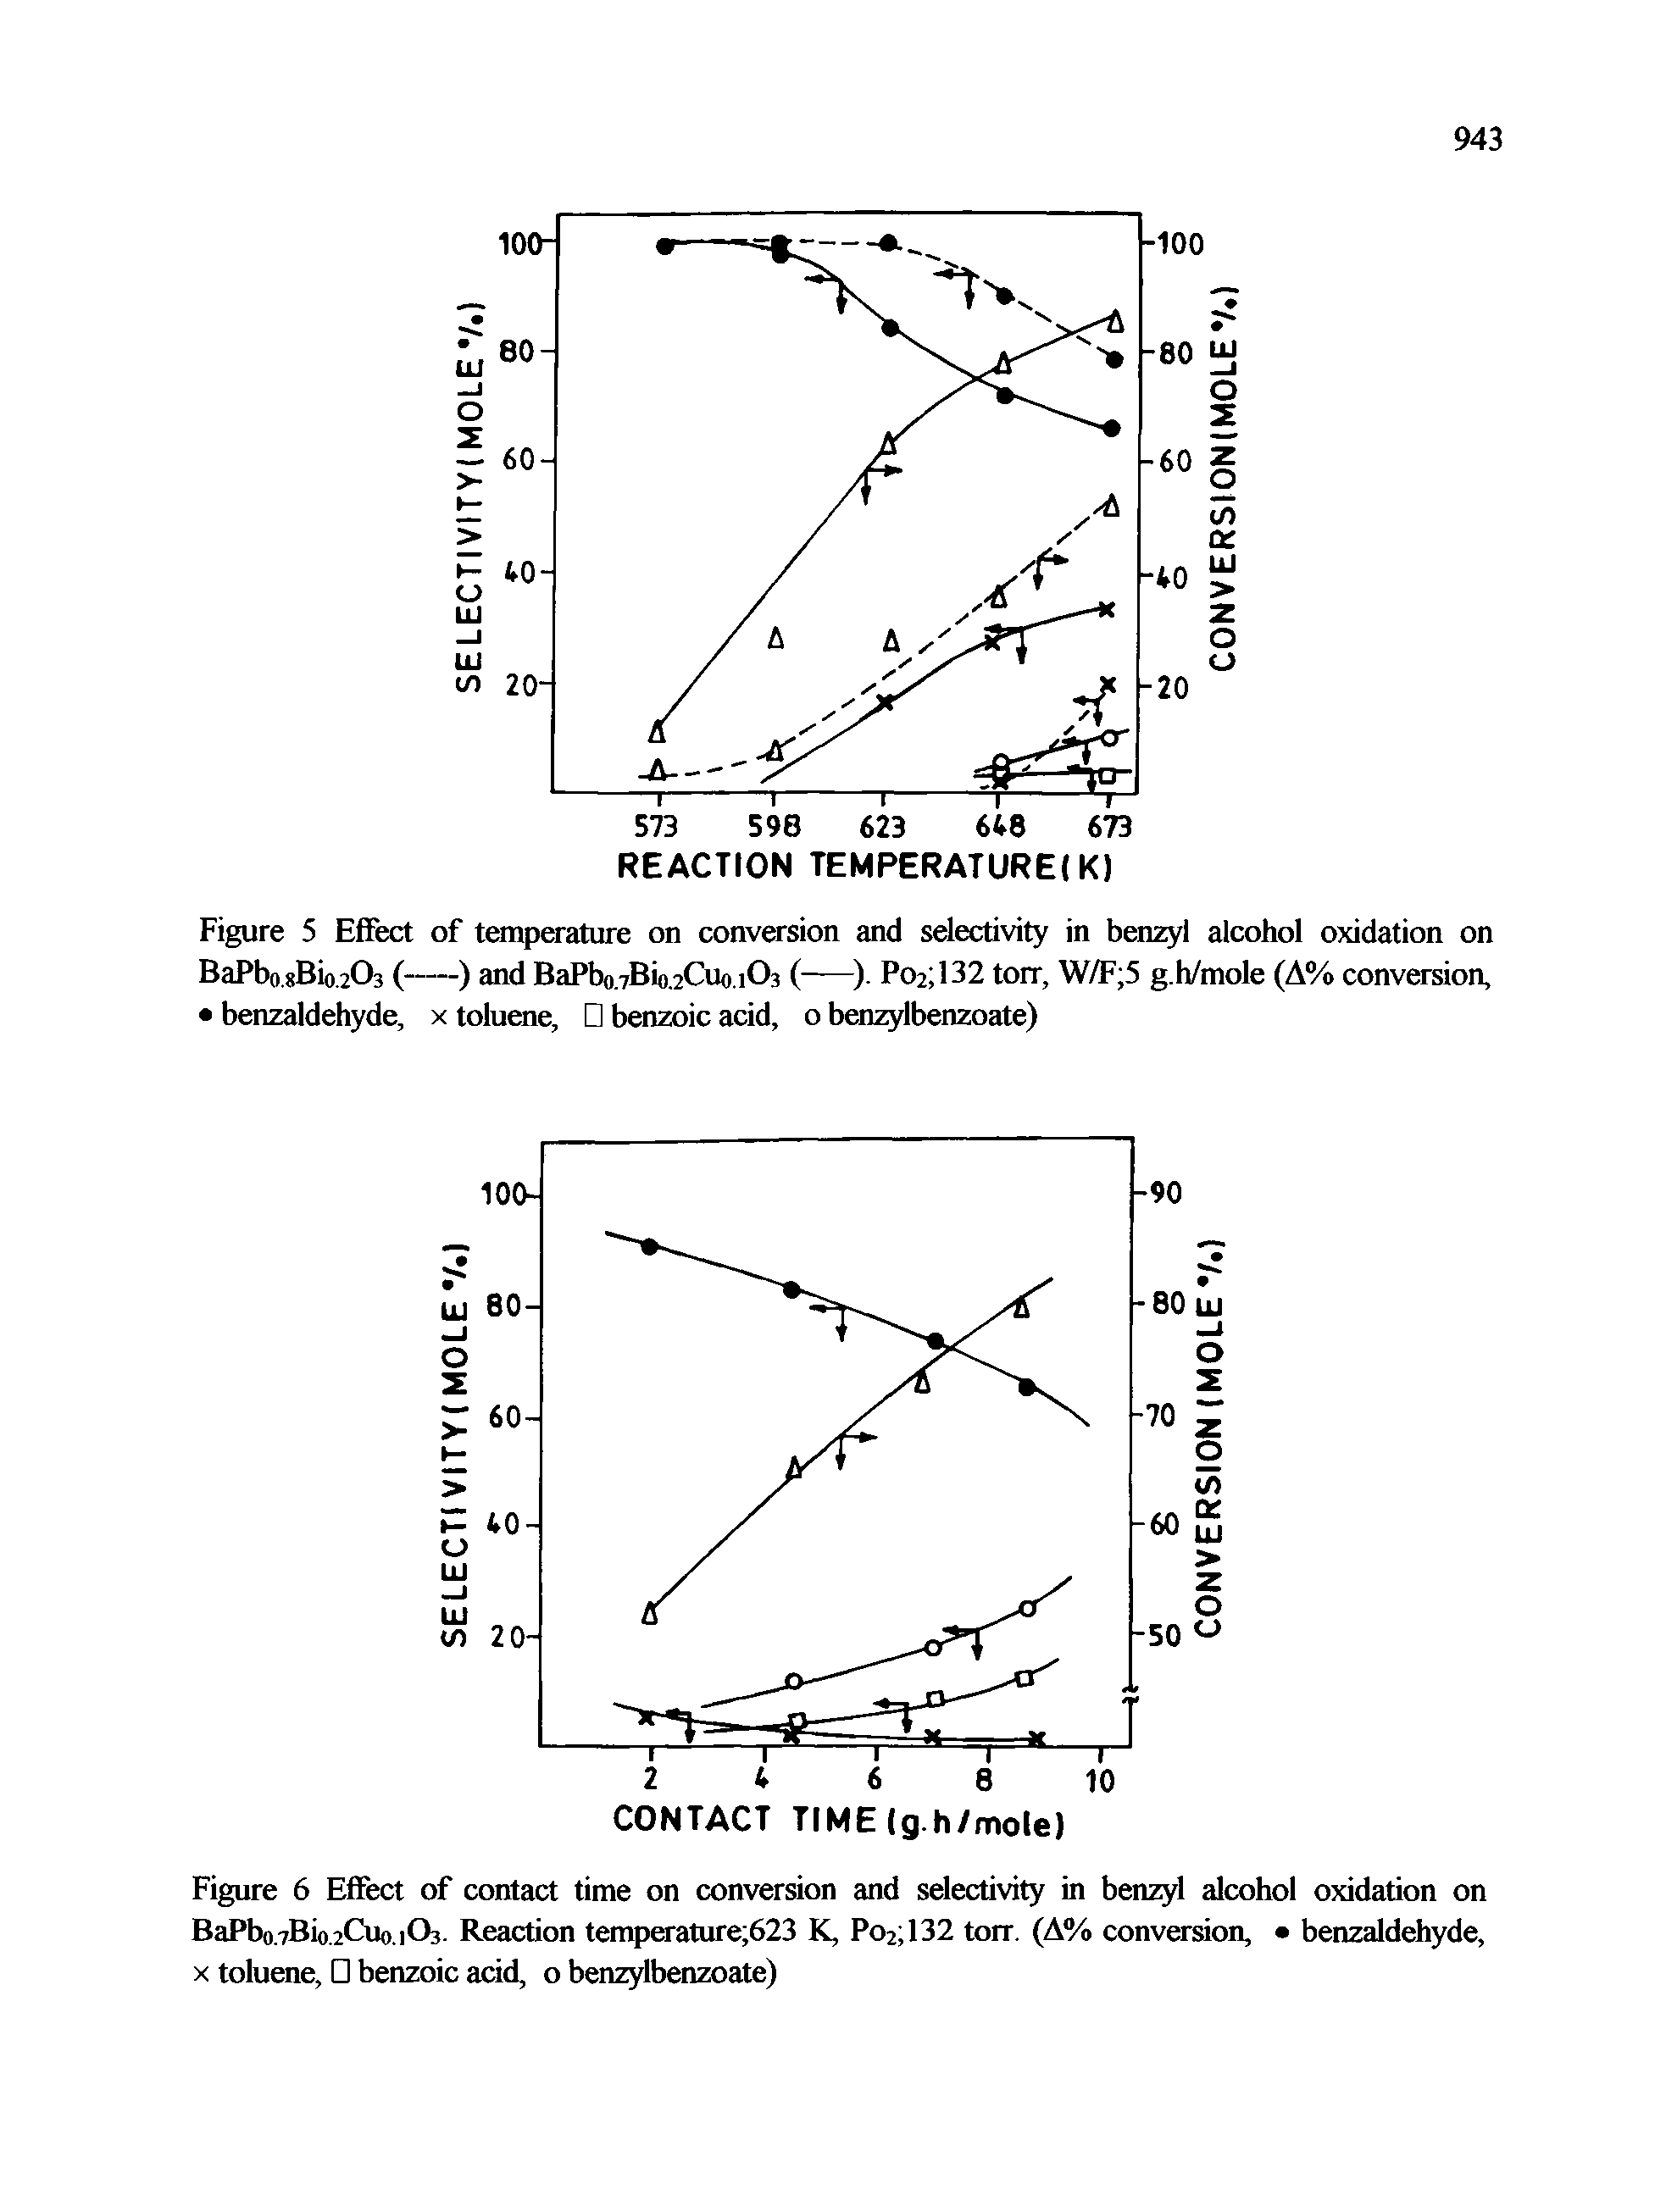 Figure 6 Effect of contact time on conversion and selectivity in benzyl alcohol oxidation on BaPbo.7Bio.2Cuo.1O3. Reaction temperature 623 K, Po2 132 torr. (A% conversion, benzaldehyde, X toluene, benzoic acid, o benzylbenzoate)...